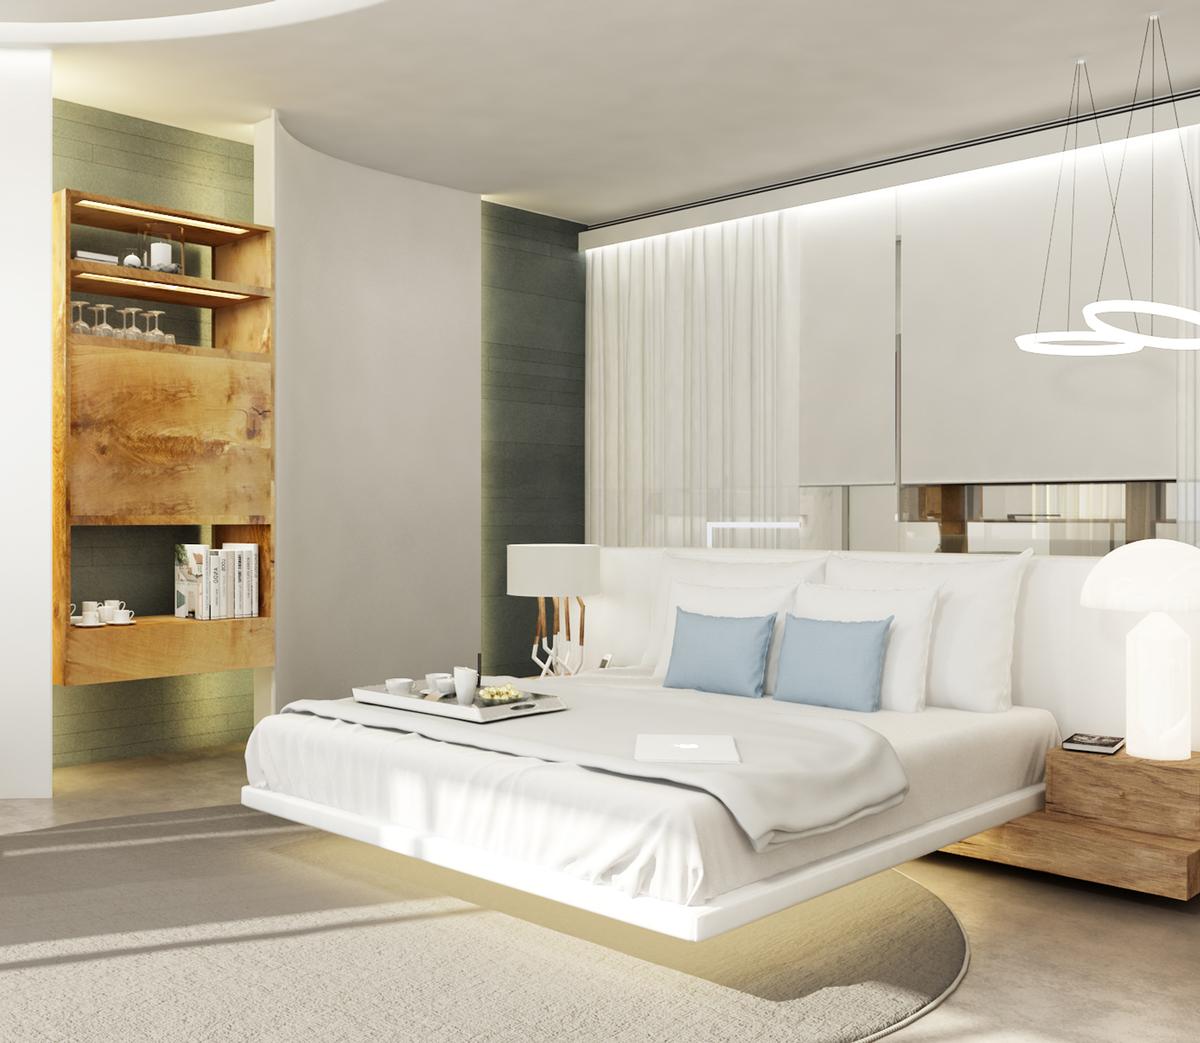 DSA Architects and interior design firm Gatserelia Design are working on the project, which showcases the brand’s signature modern, all-white decor blends with tribal influences, organic shapes and calm colours / Nikki Beach